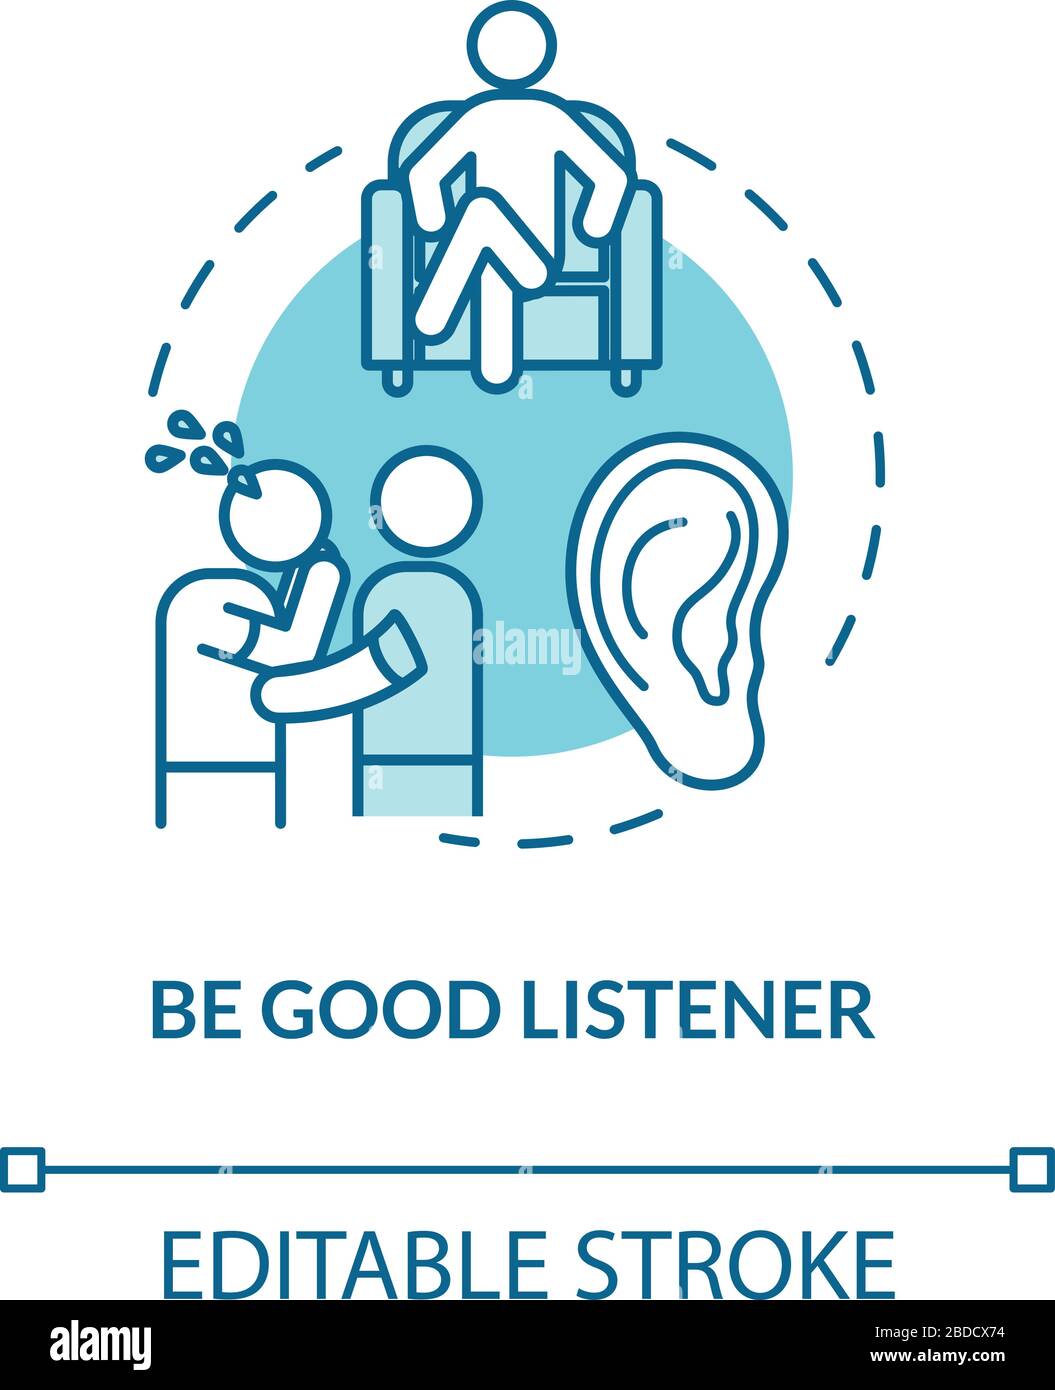 Be good listener concept icon. Friendship relationship advice. People psychological help. Friend support idea thin line illustration. Vector isolated Stock Vector